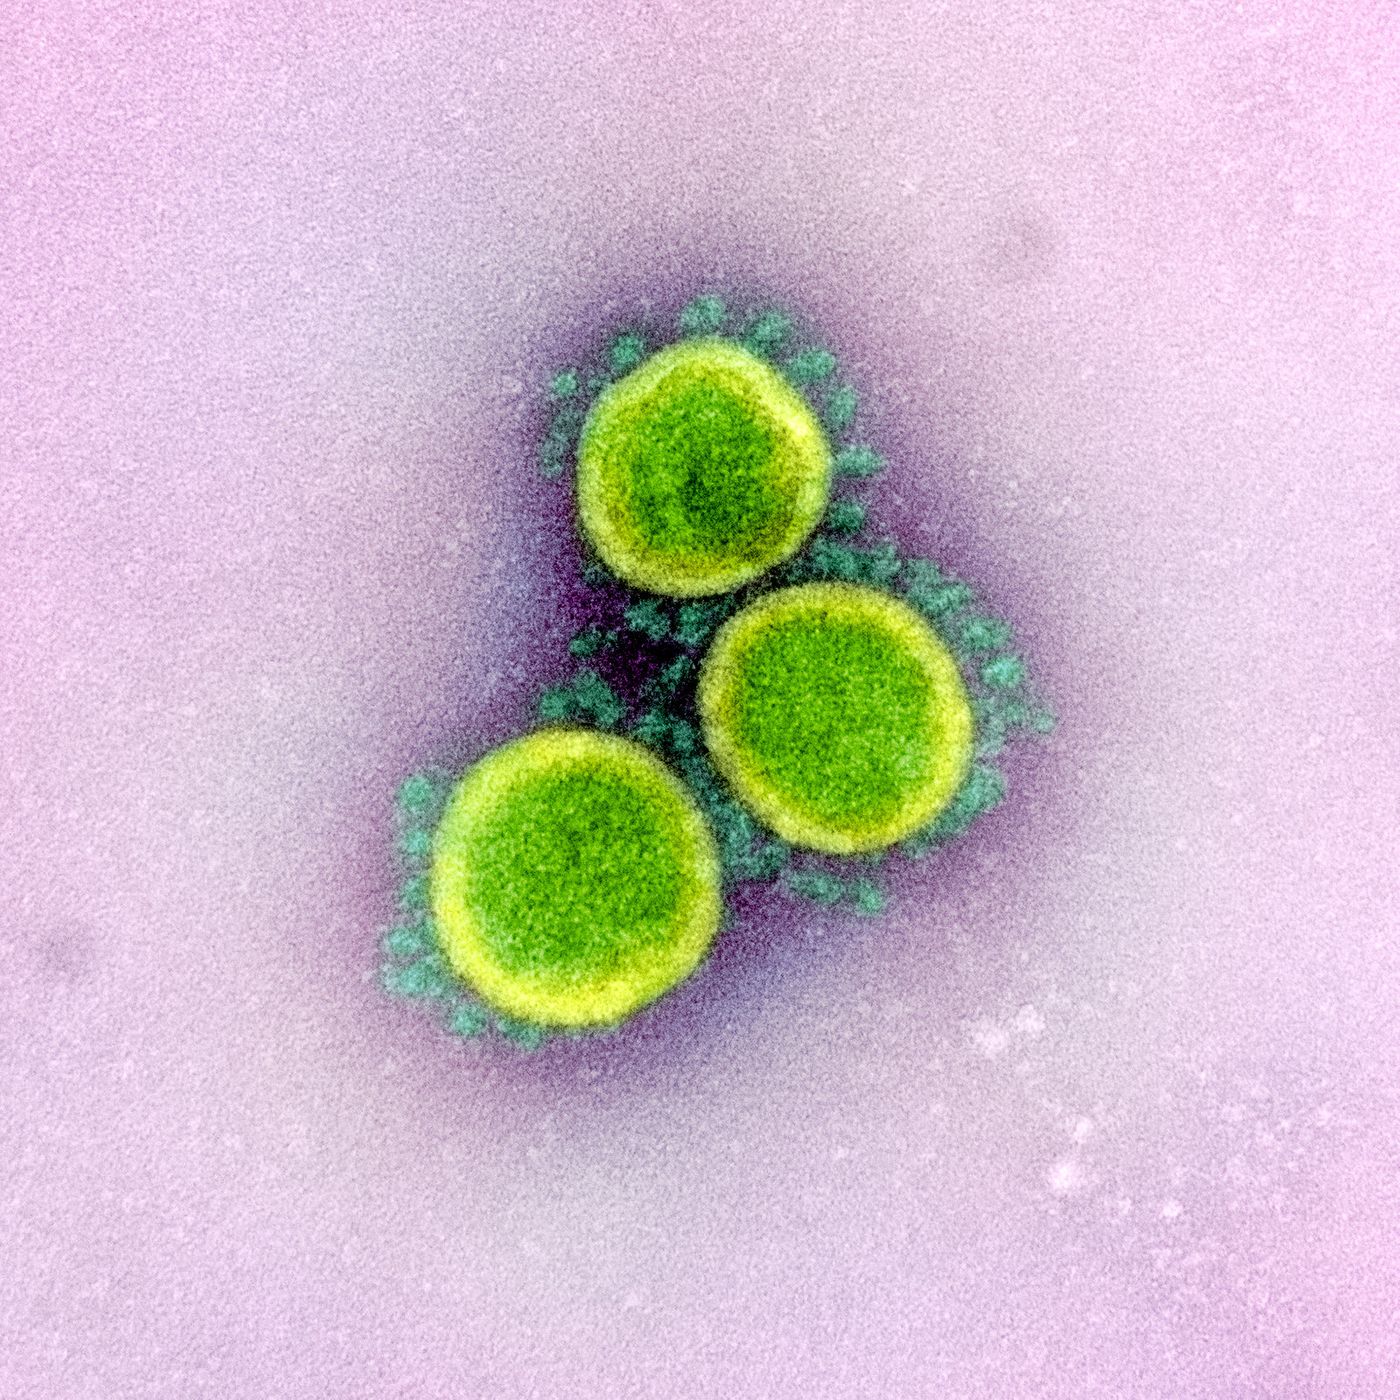 Transmission electron micrograph of SARS-CoV-2 virus particles, isolated from a patient. Image captured and color-enhanced at the NIAID Integrated Research Facility (IRF) in Fort Detrick, Maryland. / Credit: NIAID